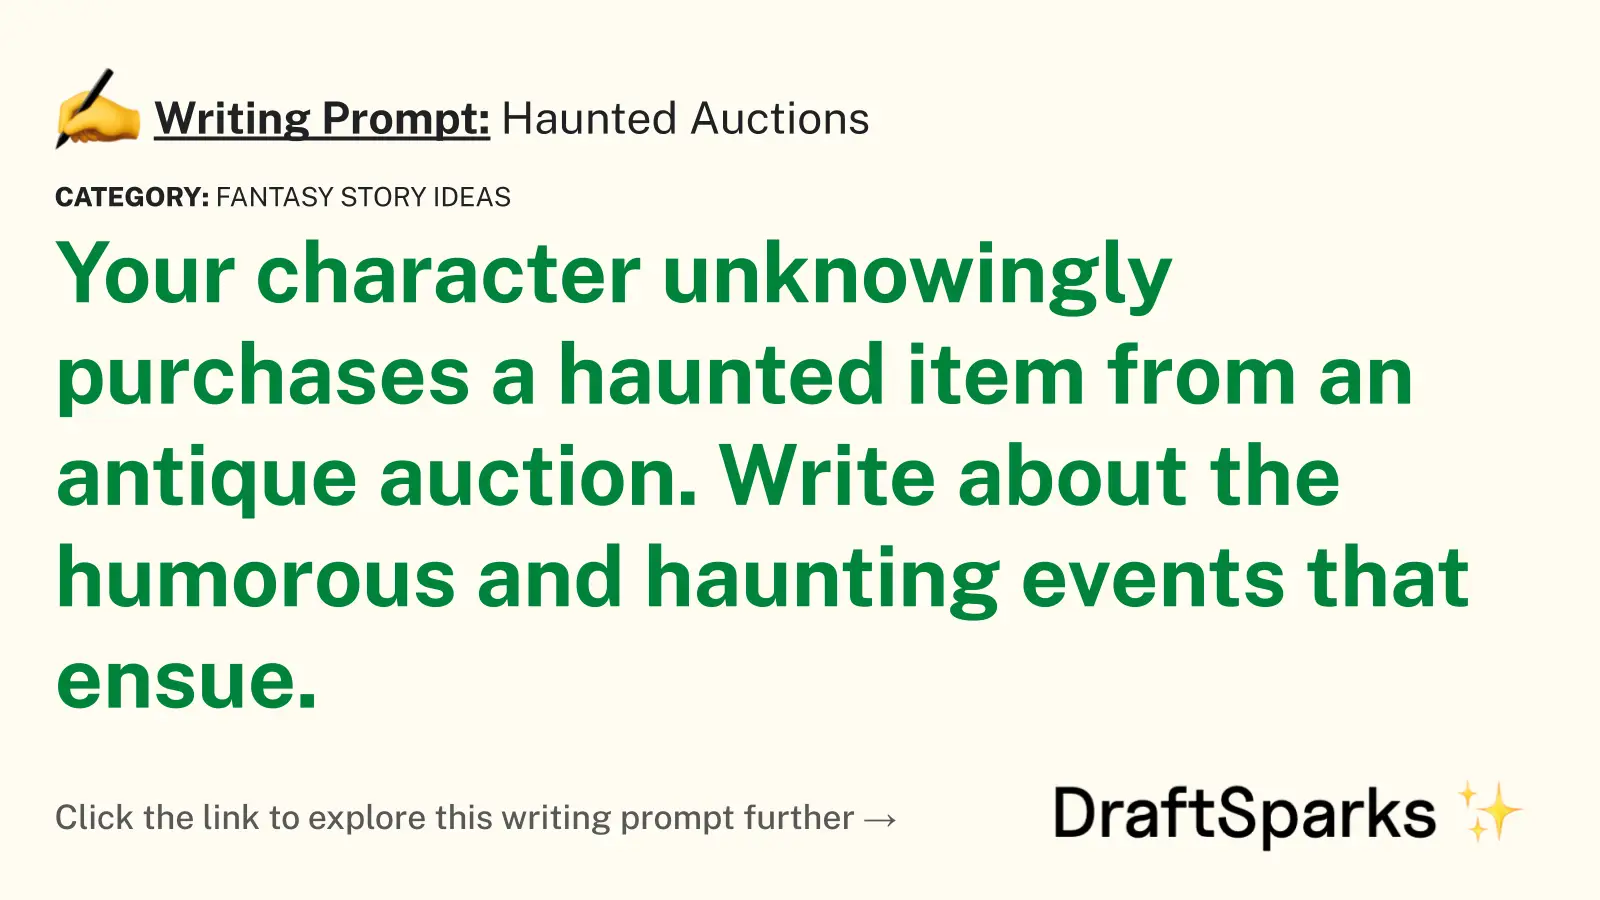 Haunted Auctions